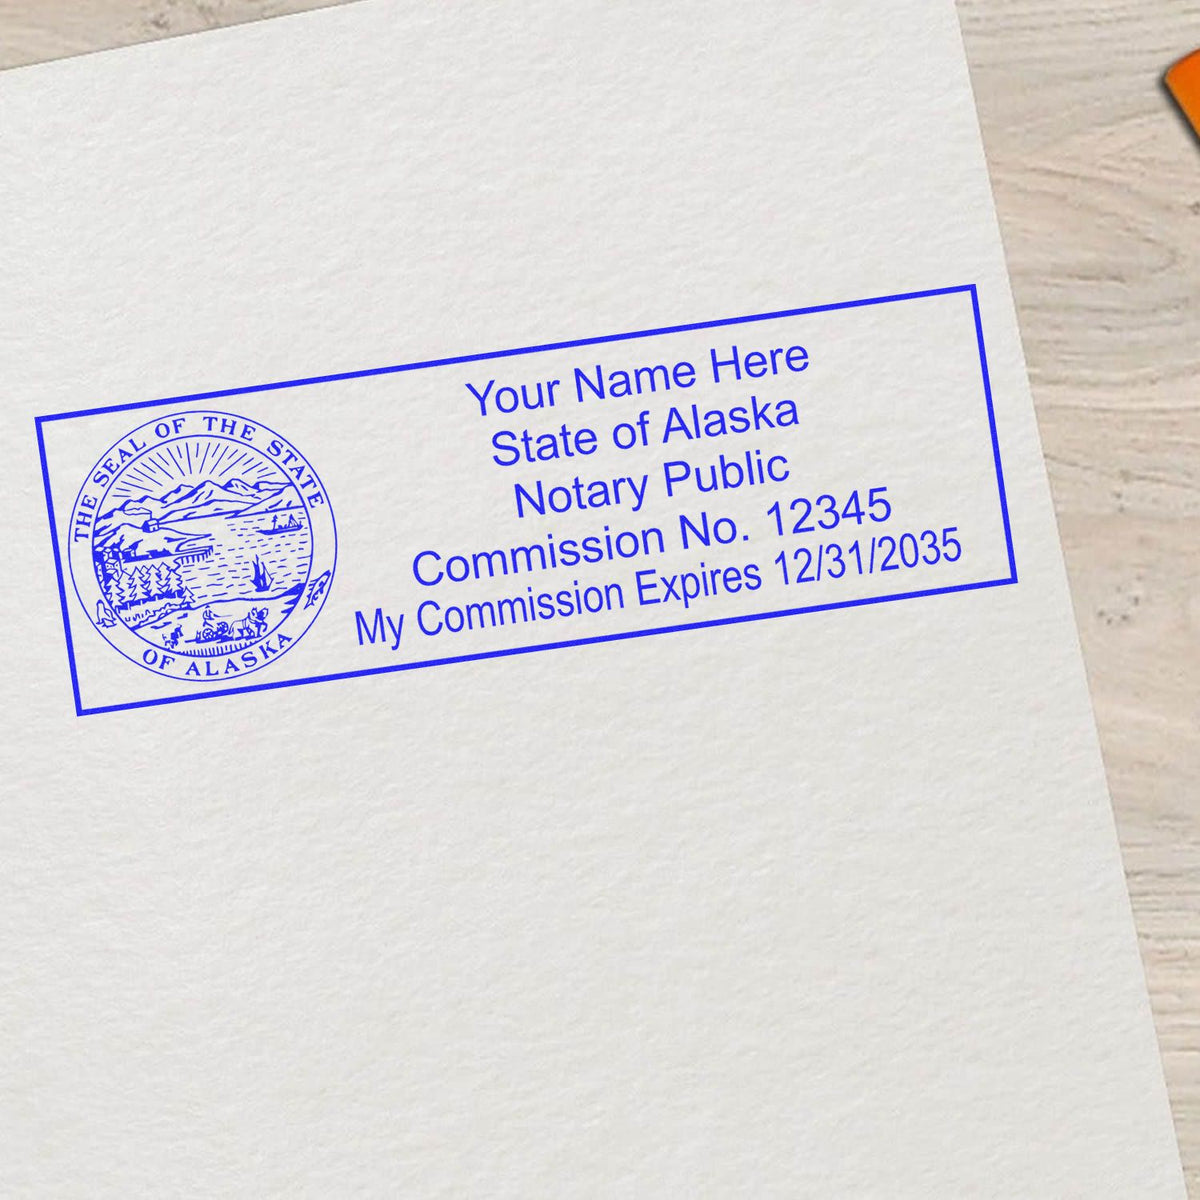 This paper is stamped with a sample imprint of the Slim Pre-Inked State Seal Notary Stamp for Alaska, signifying its quality and reliability.